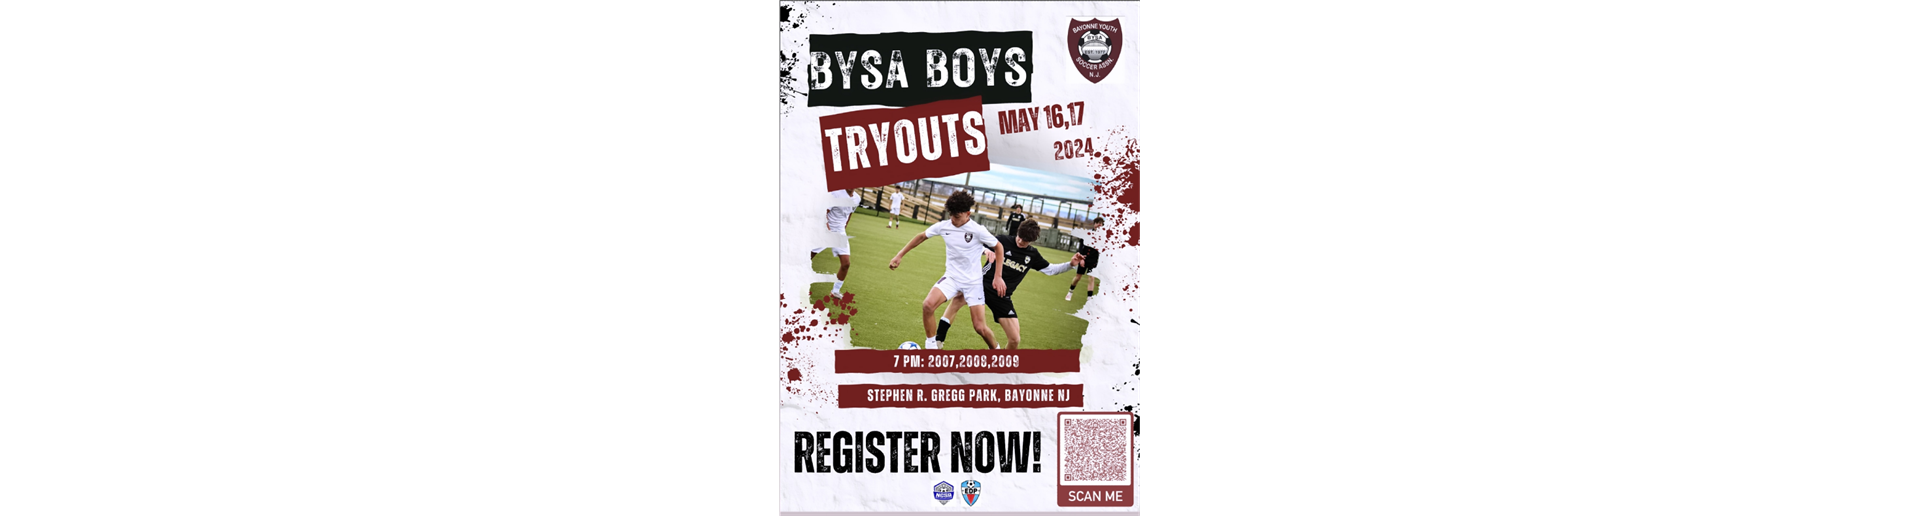 U18 Travel Tryouts for 2007, 2008 and 2009